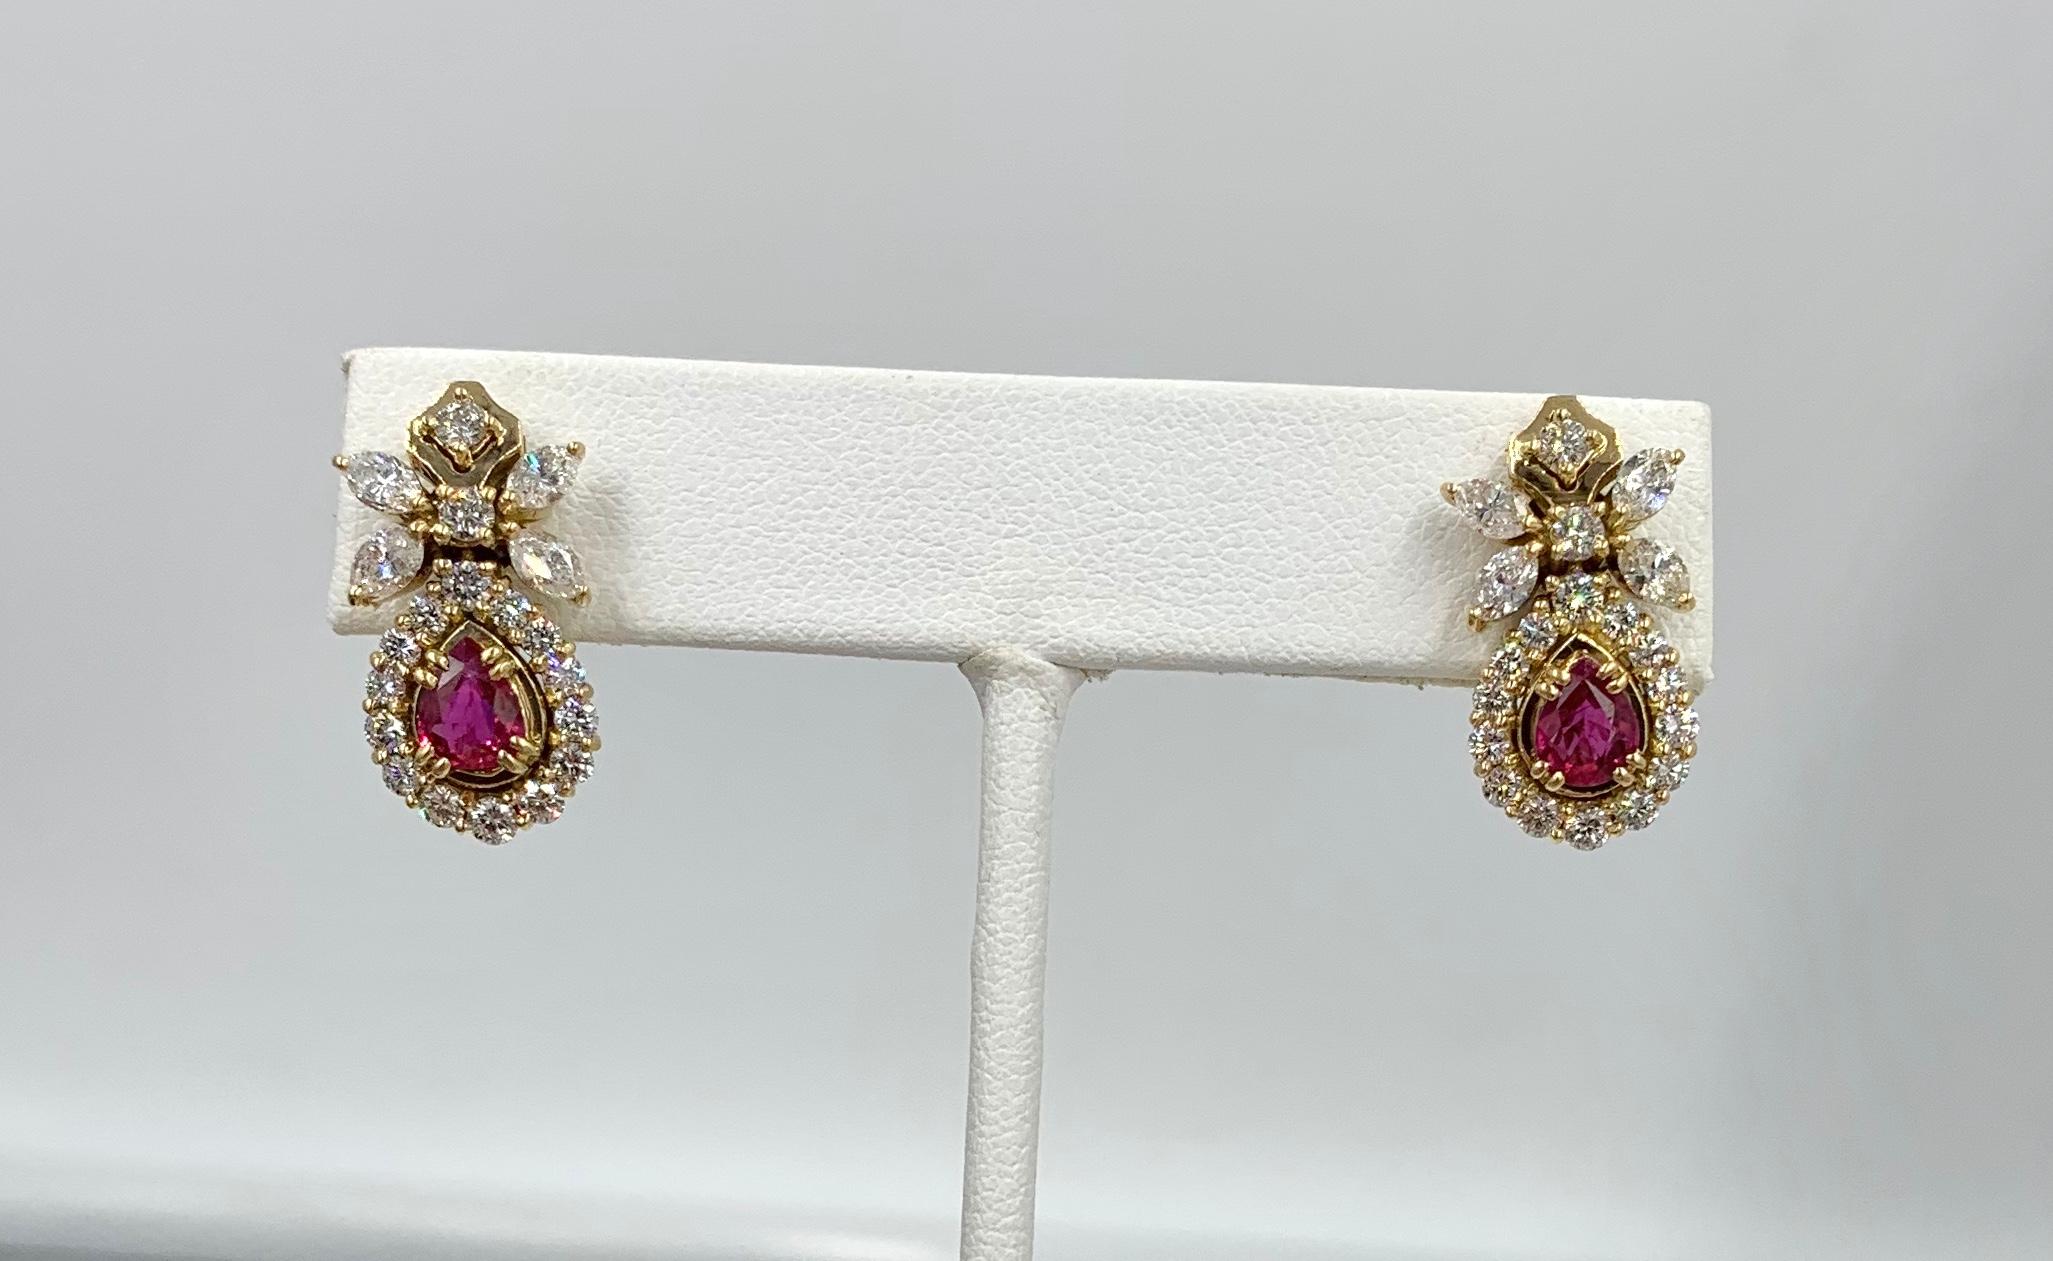 A magnificent pair of Pear Shape Ruby and Diamond Halo Flower Motif Drop Dangle Earrings in 18 Karat Gold.   The delightful jewels feature gorgeous Pear Shape Fine Red Rubies.  The Rubies total .87 Carats and have wonderful red color and fire.  The